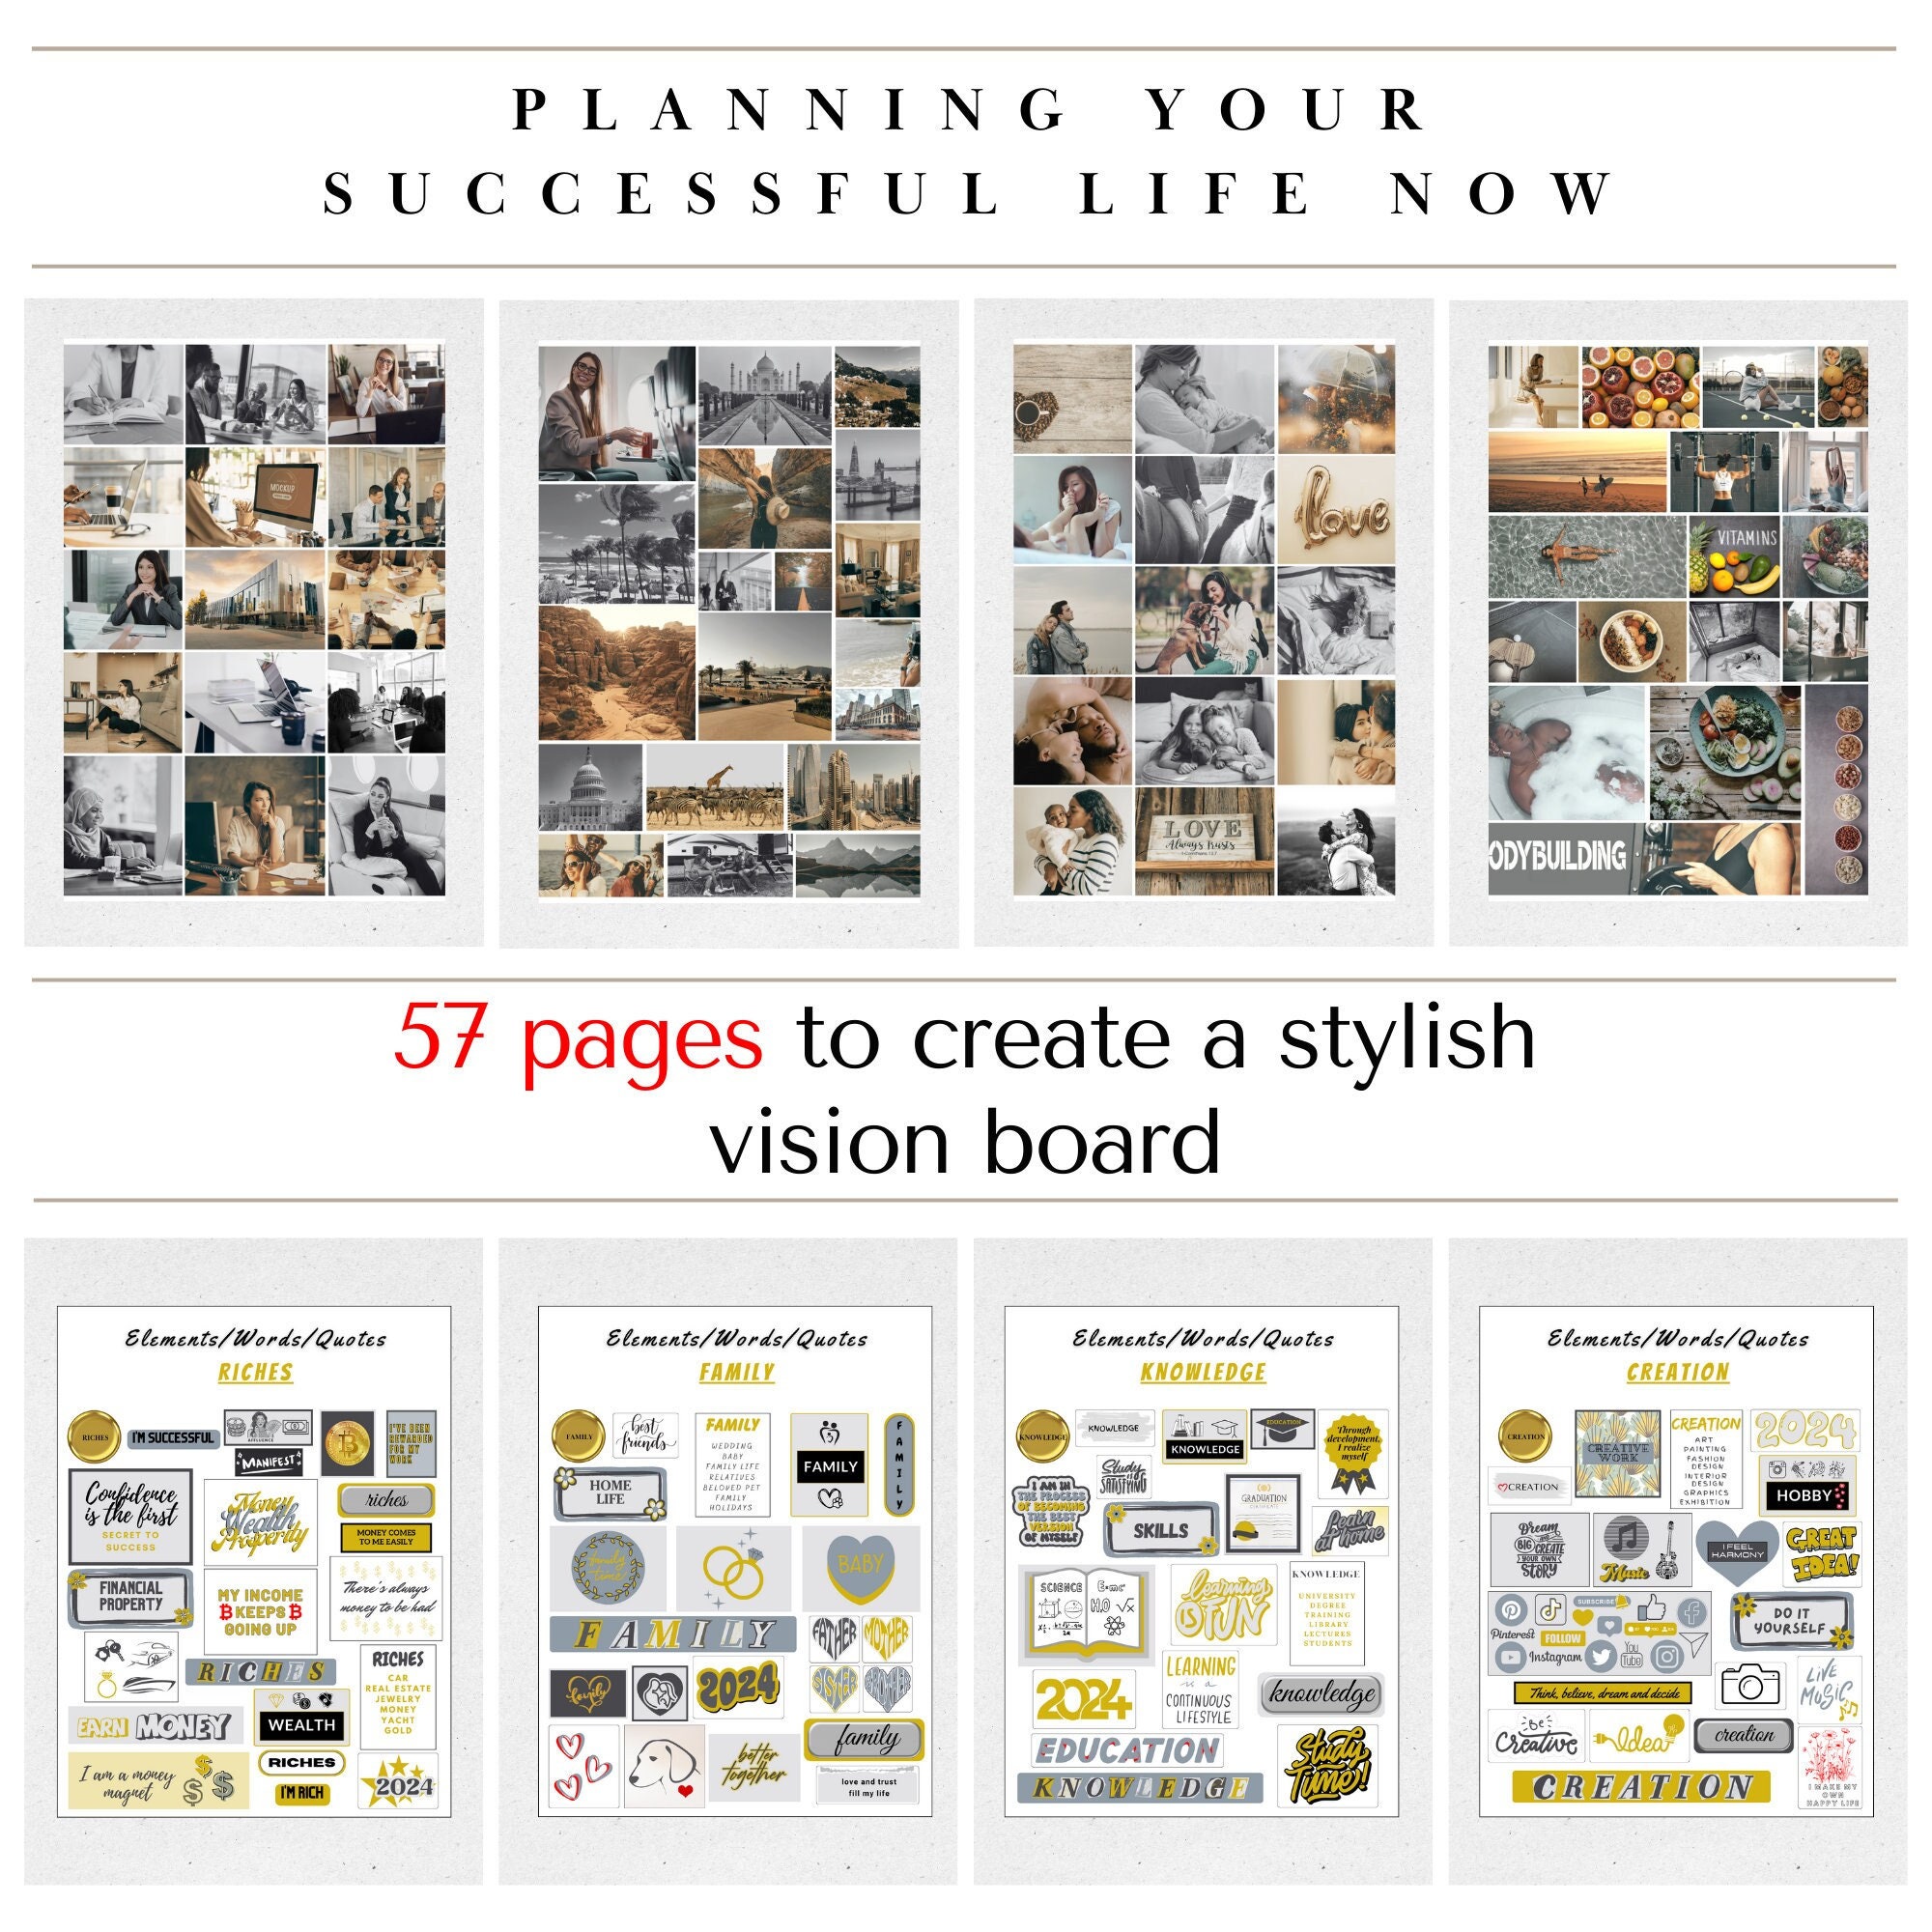 Vision Board Challenge Sales Page - ORGANIC - Wife Teacher Mommy